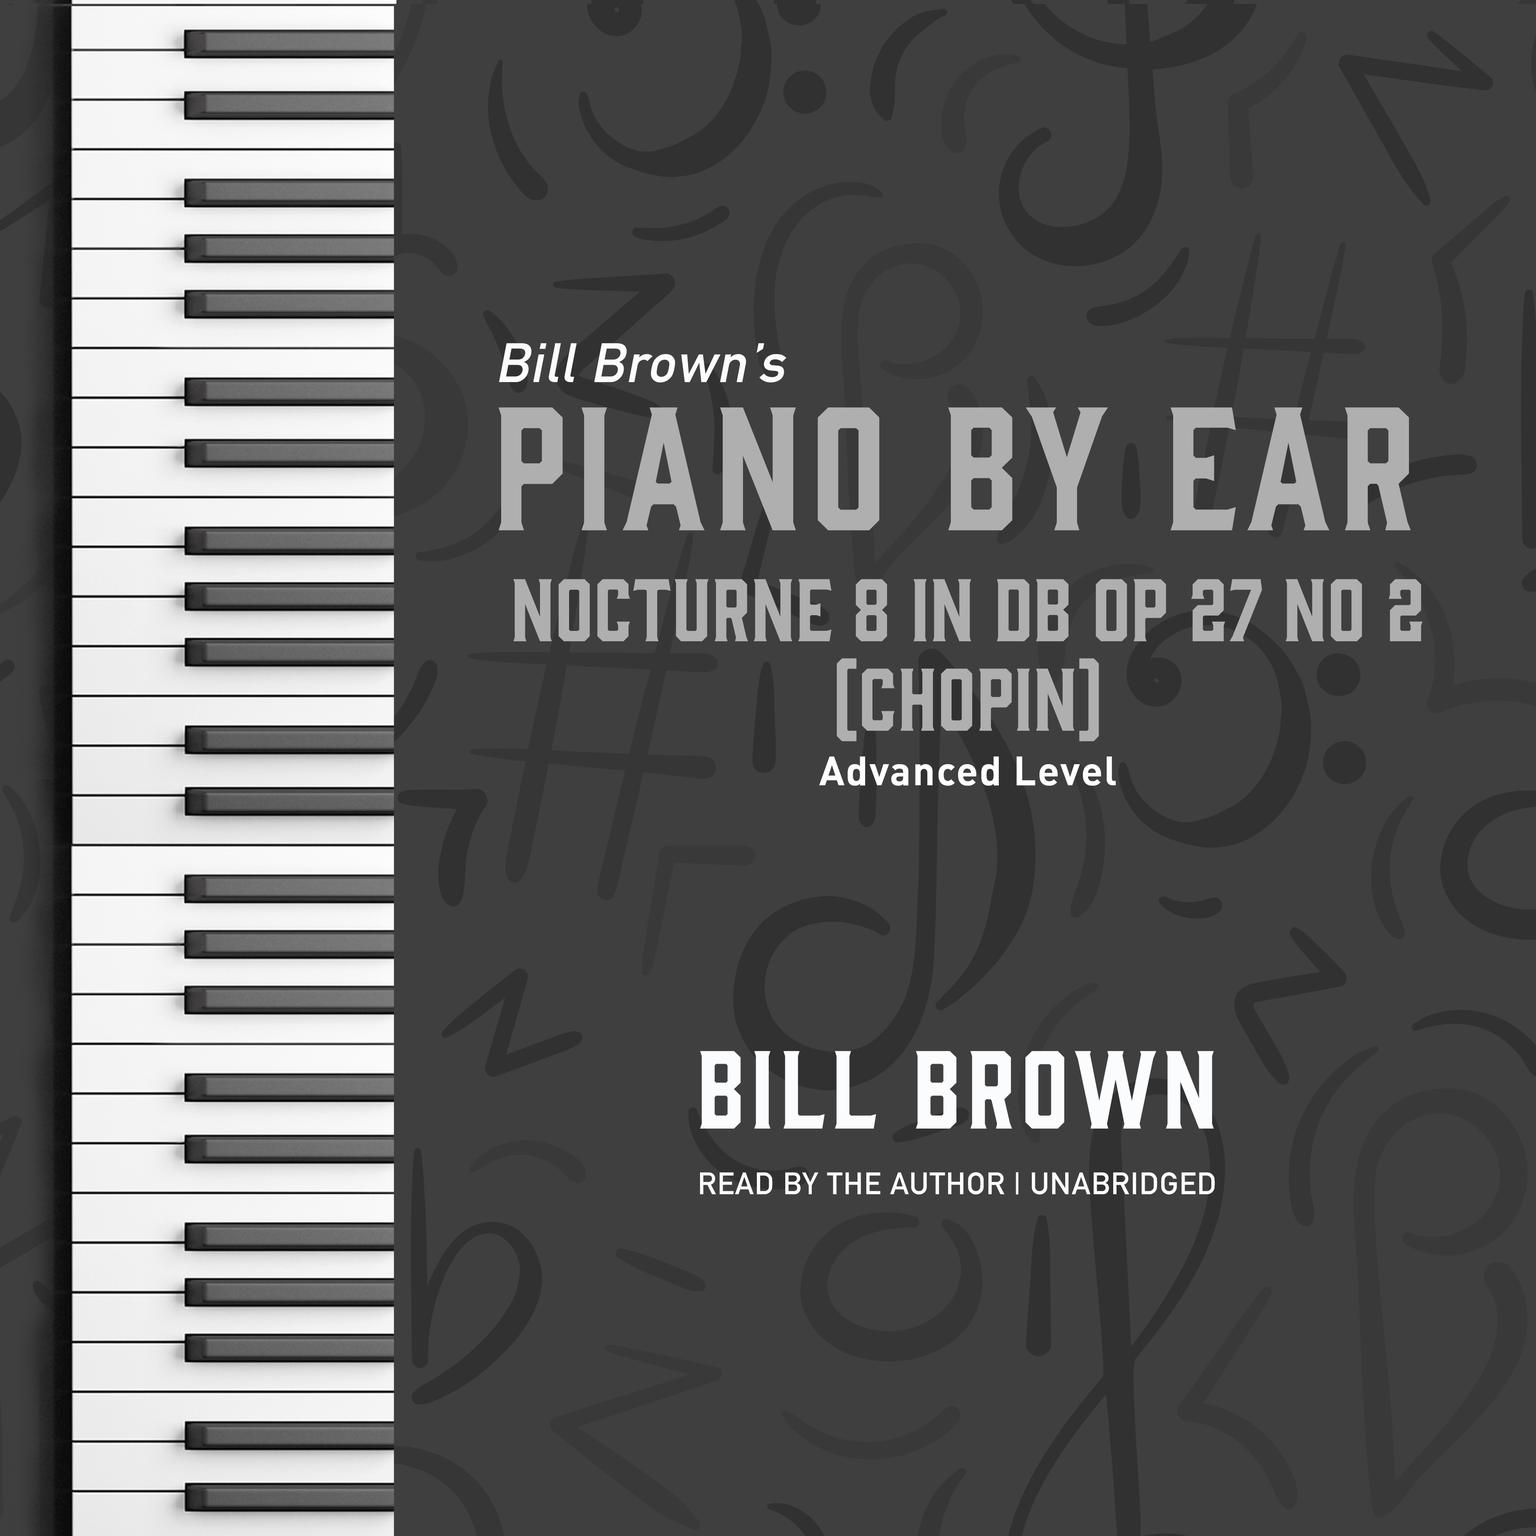 Nocturne 8 in Db Op 27 no 2 (Chopin): Advanced Level Audiobook, by Bill Brown